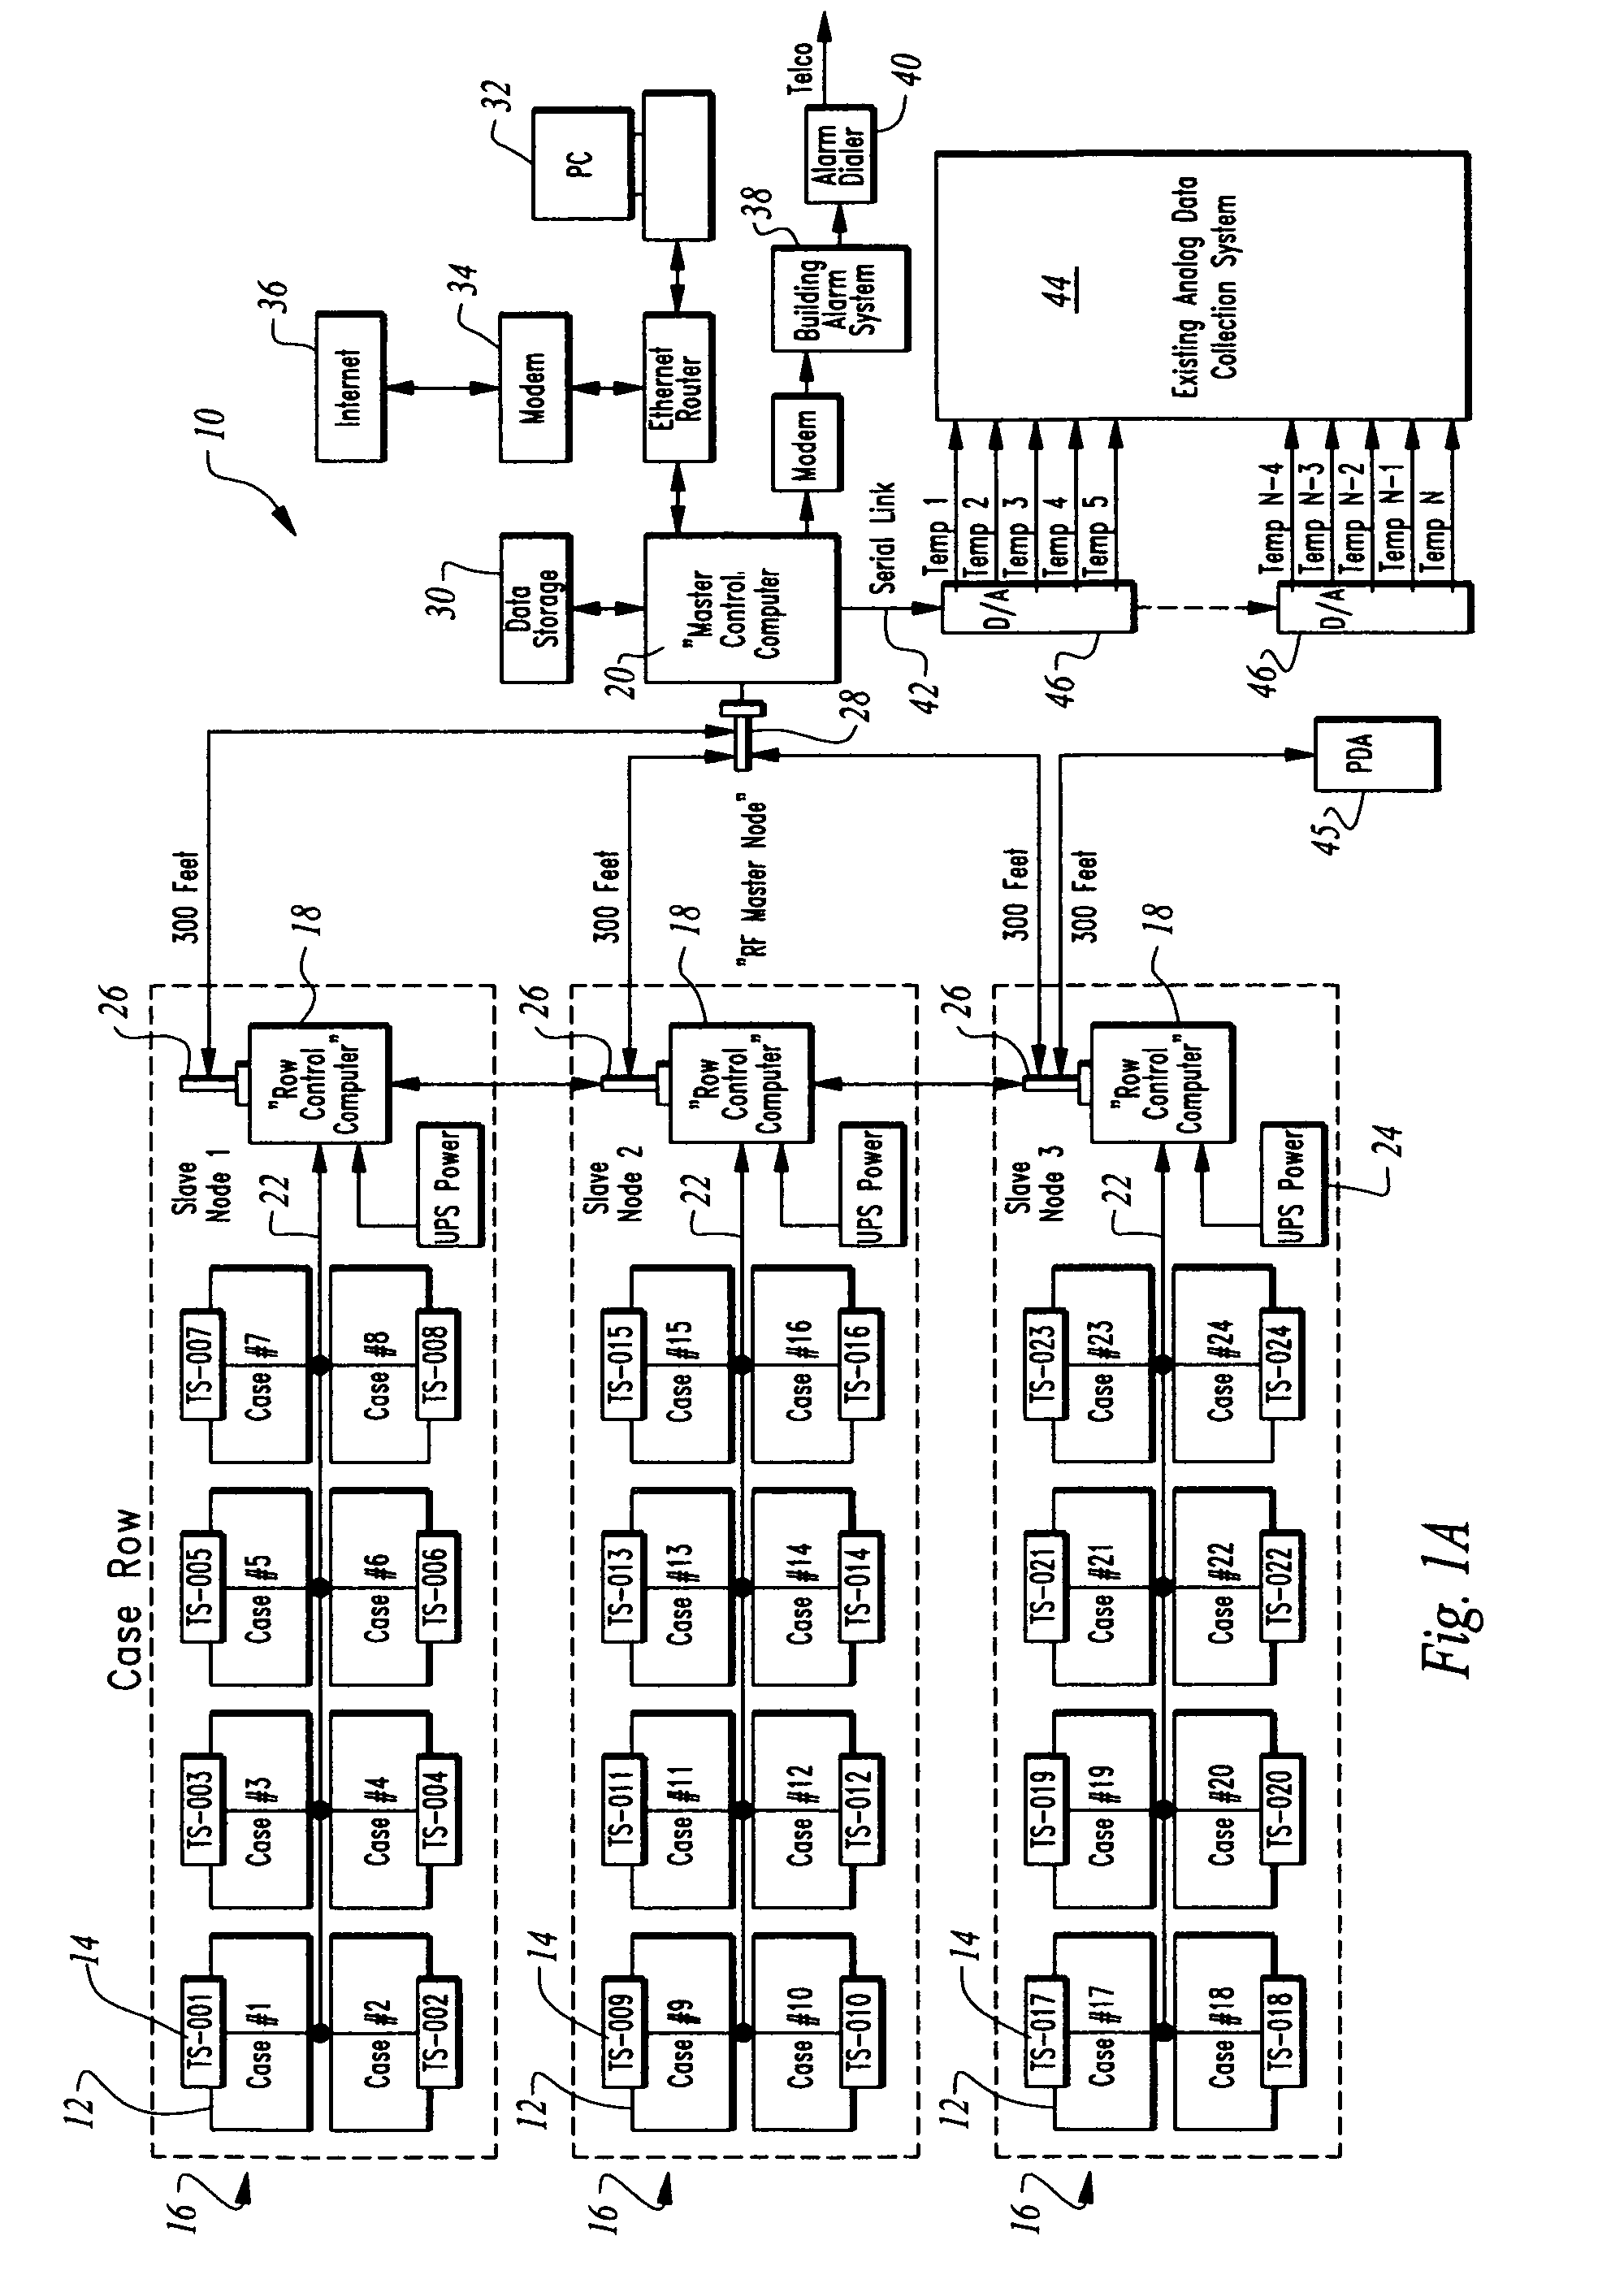 Refrigeration temperature monitoring system and associated temperature display